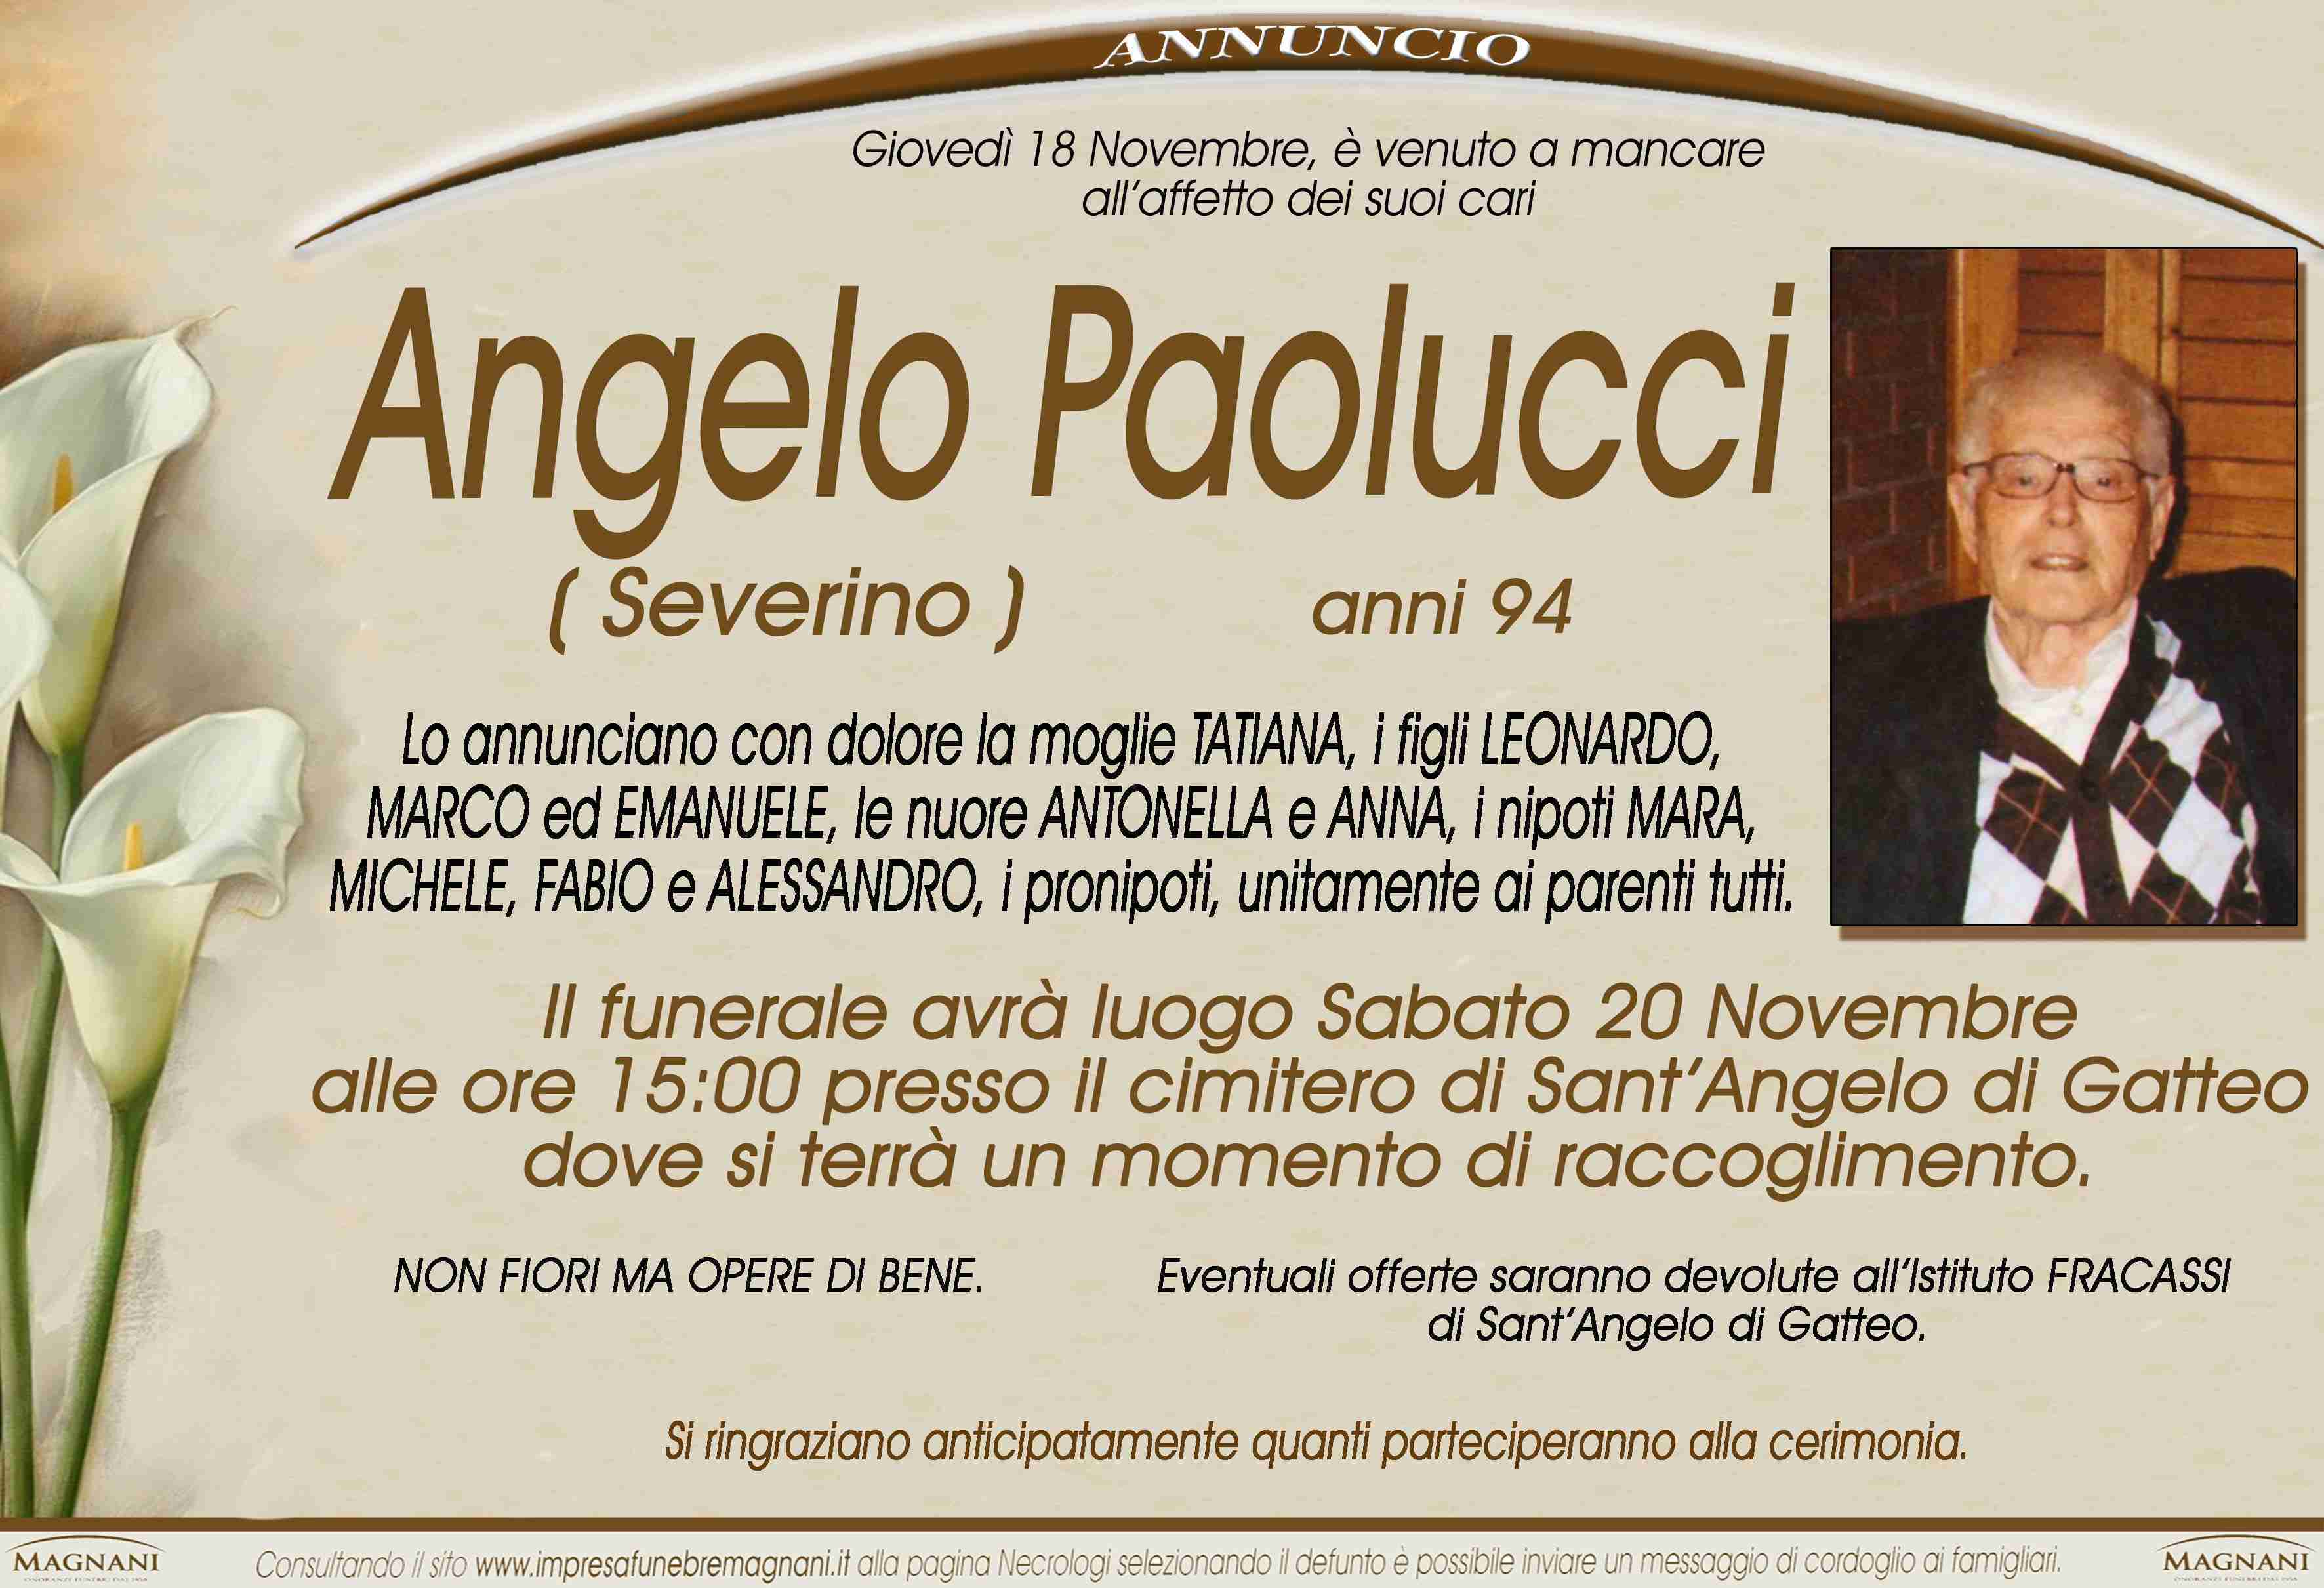 Paolucci Angelo